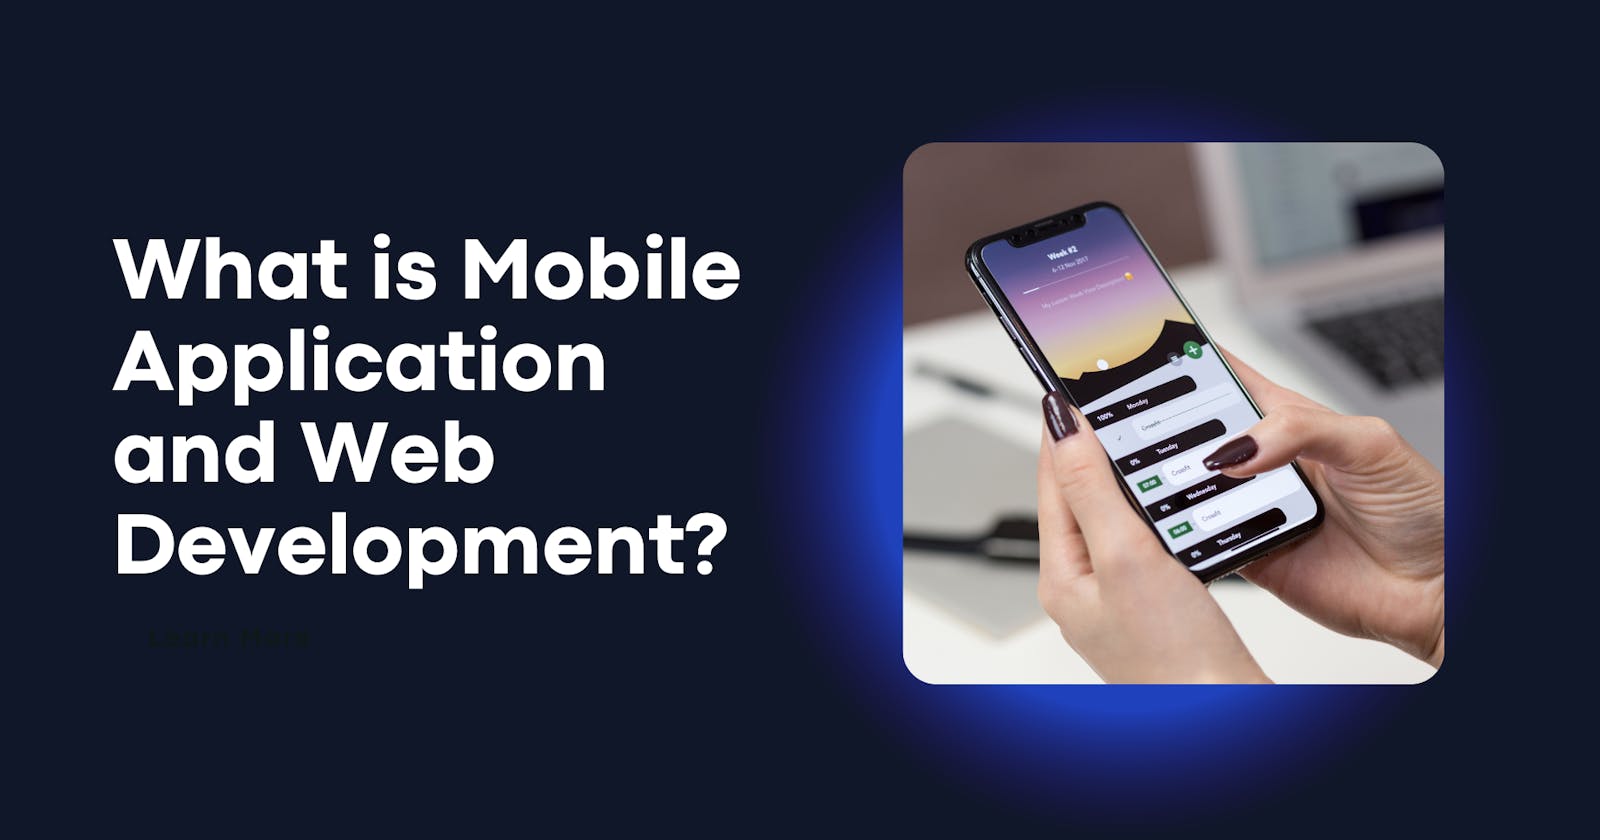 What is Mobile Application and Web Development?